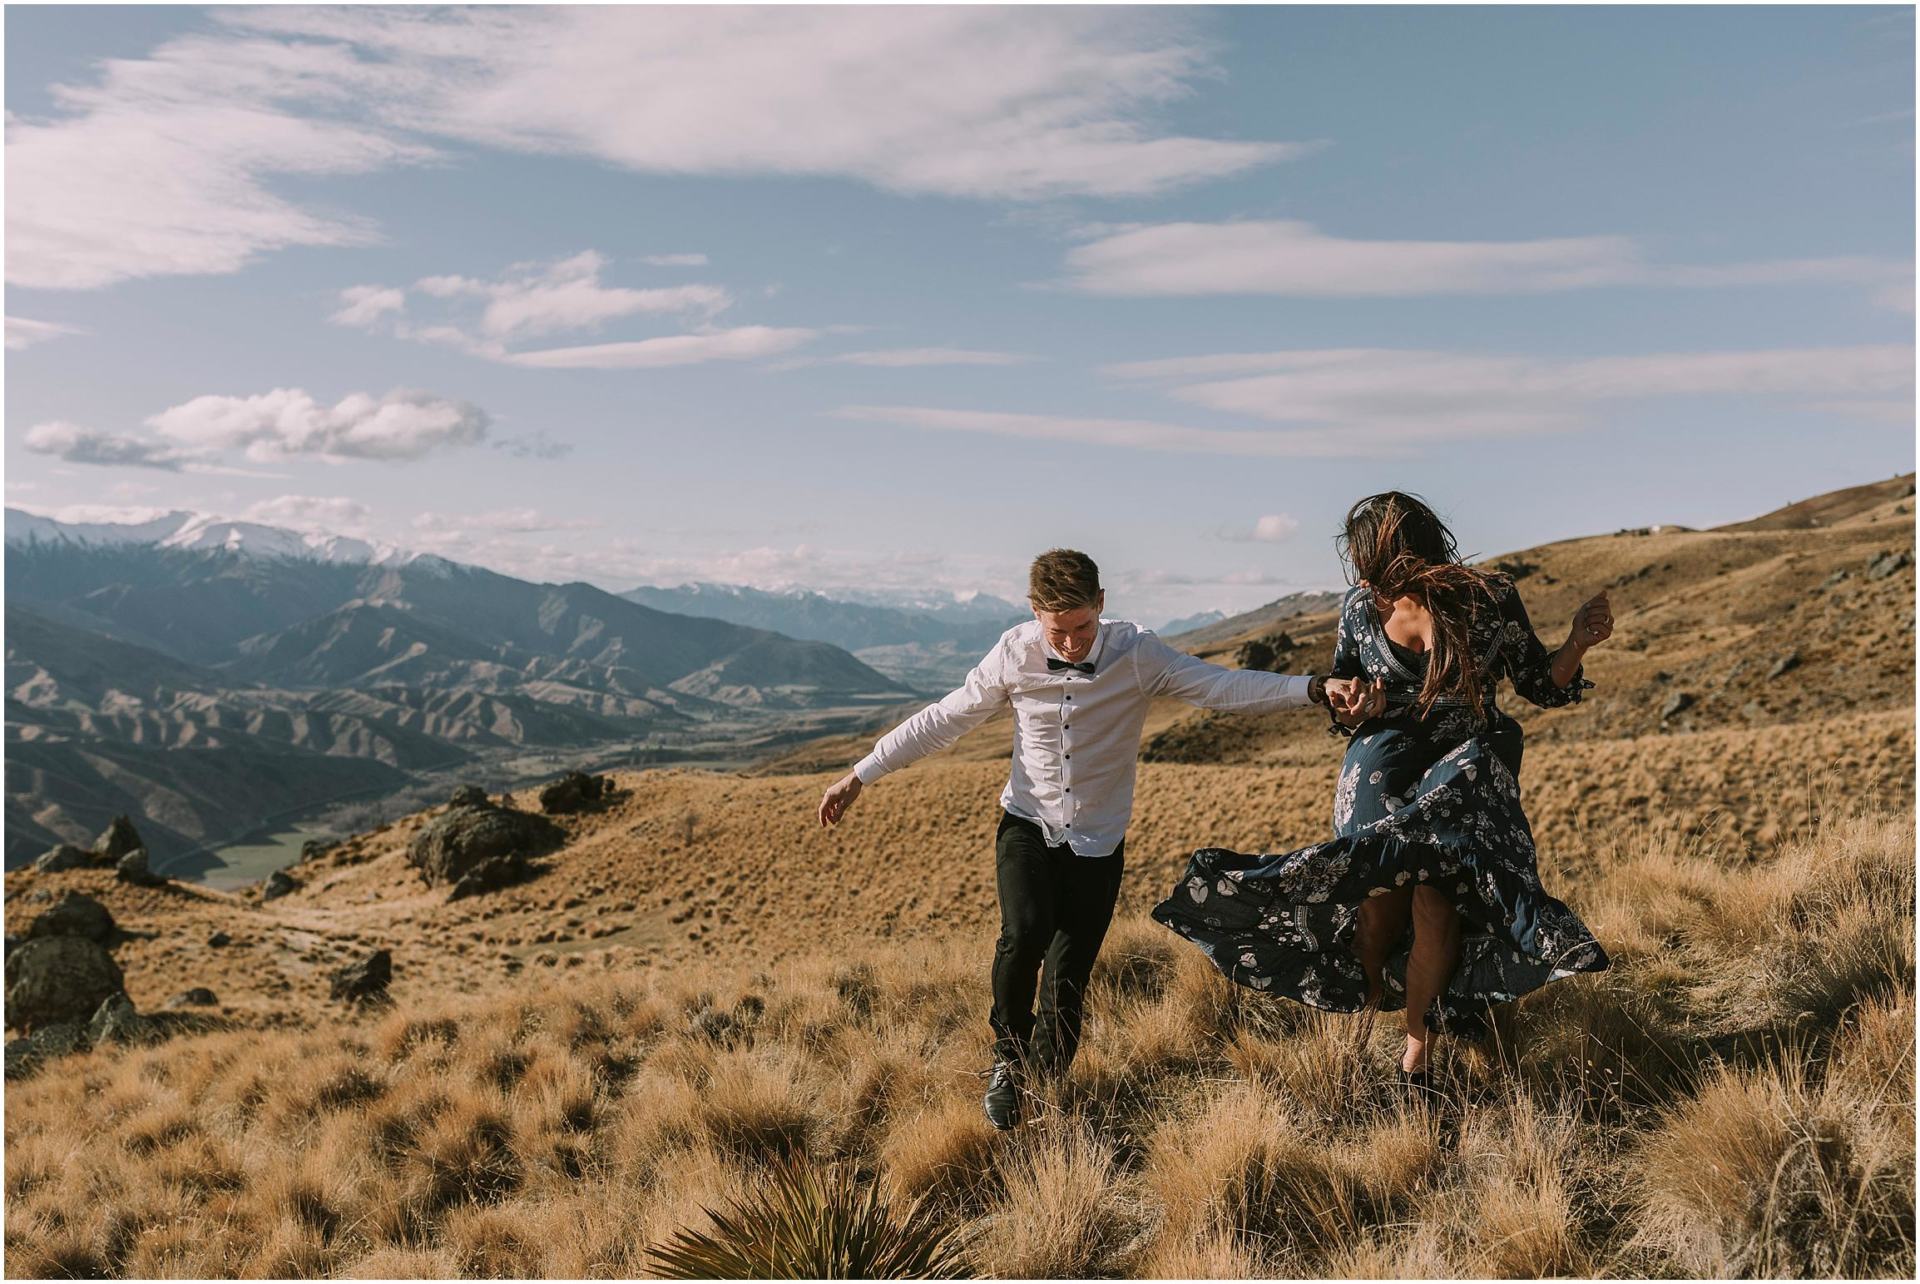 Charlotte Kiri Photography - Engagement Photography with a joyous couple holding hands and running in the tussock grass on a mountain with the stunning landscape of mountains and valleys behind in Wanaka, New Zealand